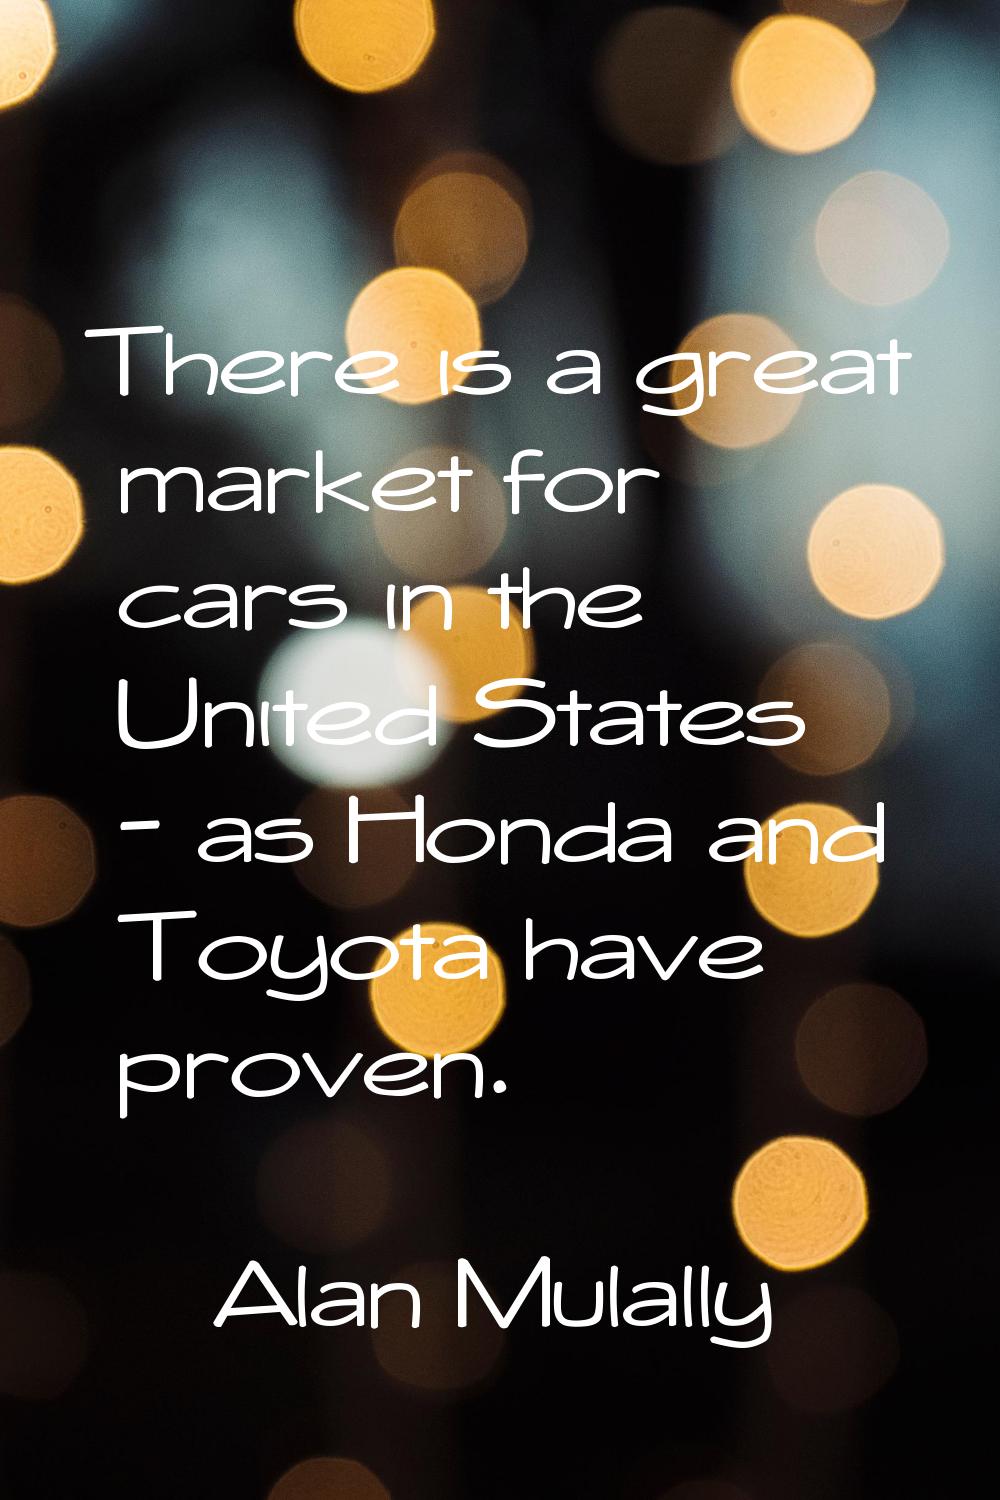 There is a great market for cars in the United States - as Honda and Toyota have proven.